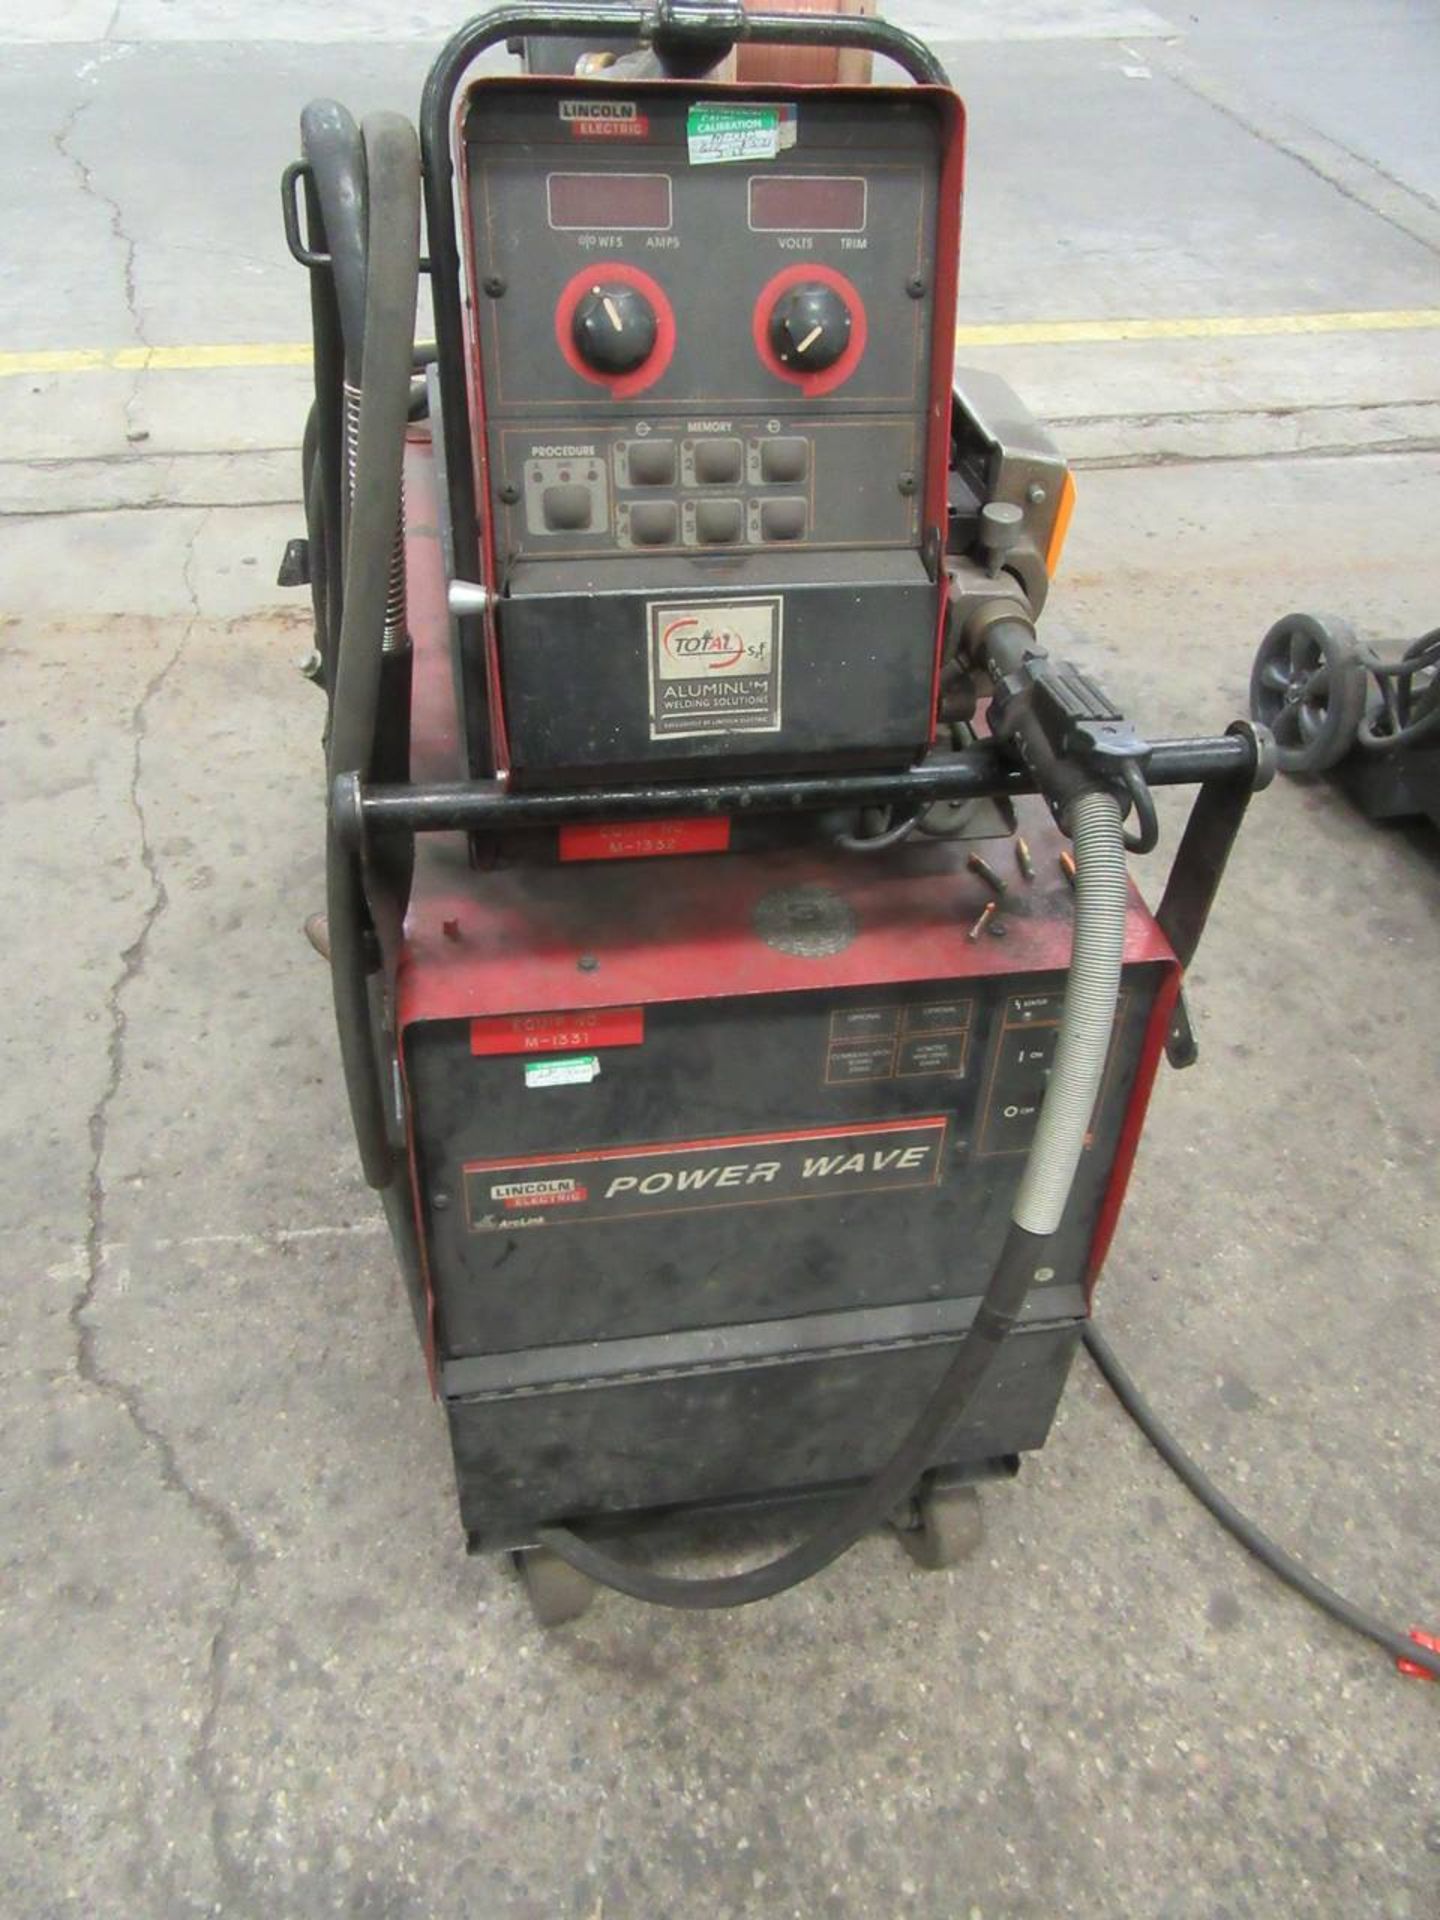 2007 Lincoln Power Wave 455M Advance Process Welder - Image 3 of 5